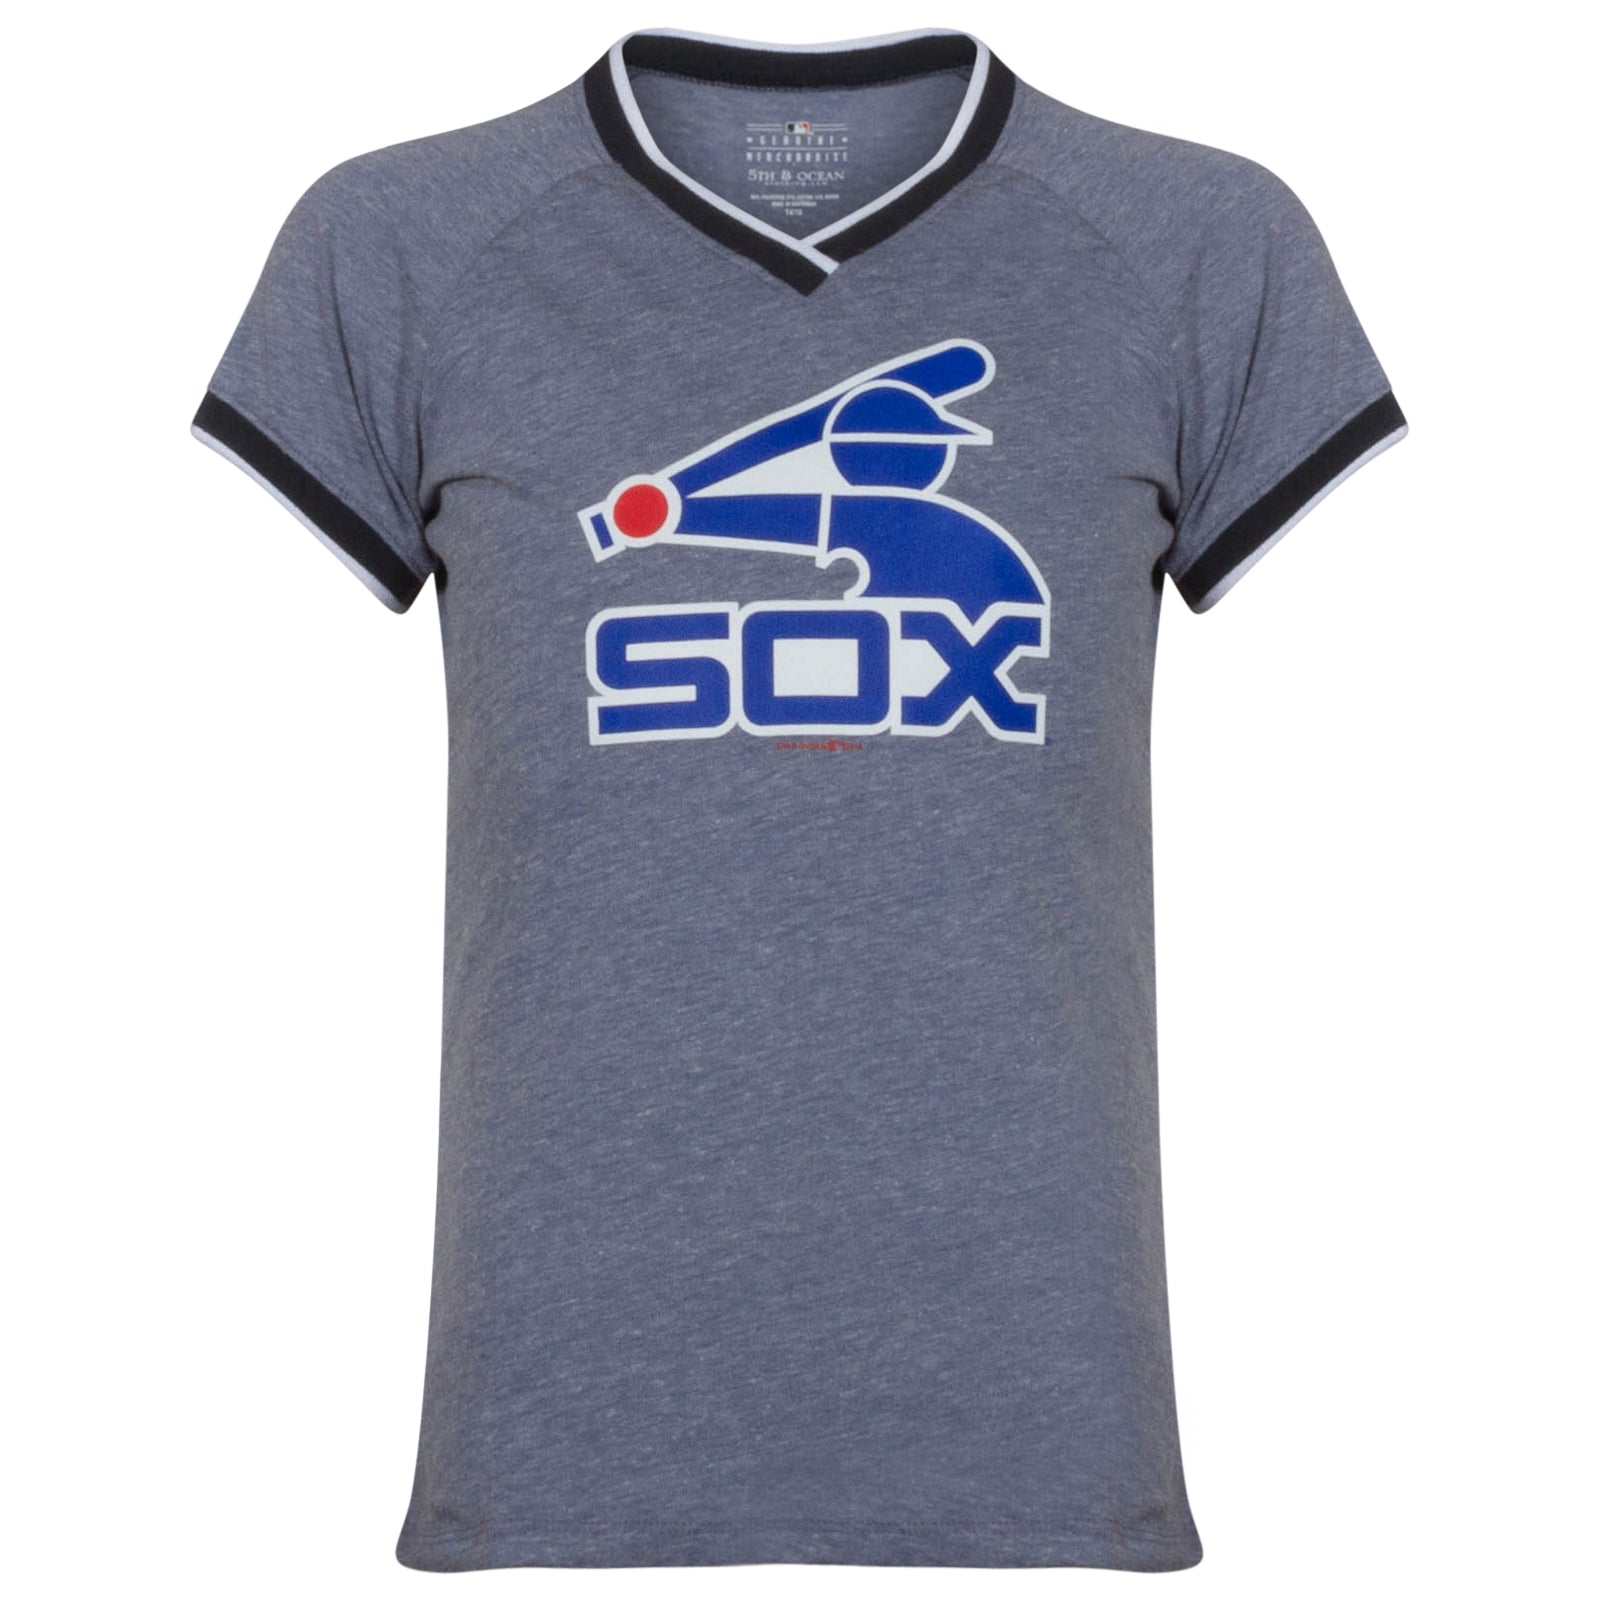 Pink Sequin Chicago White Sox T-Shirt